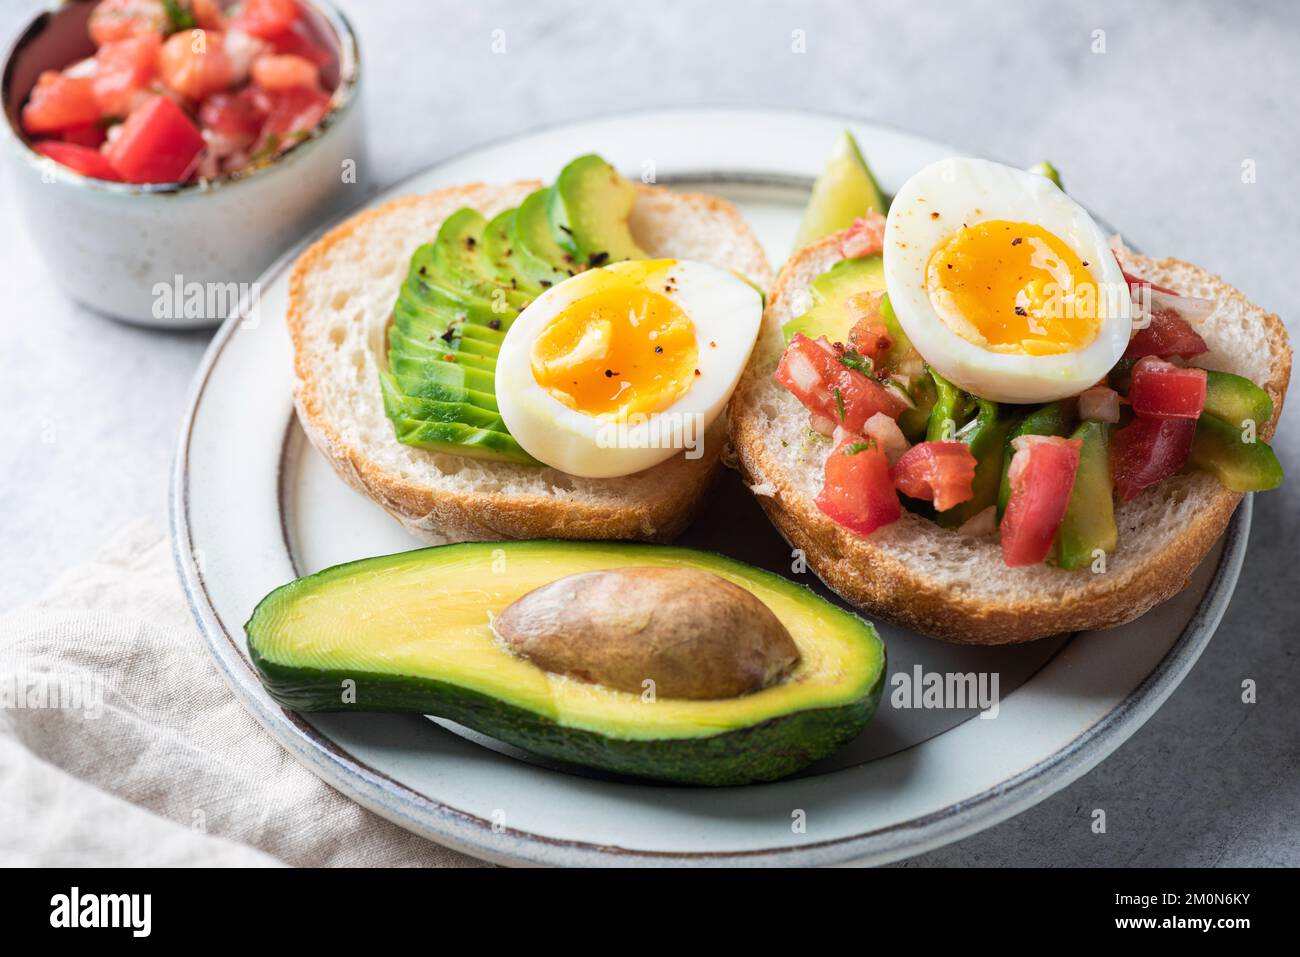 Toast with egg, tomato and avocado on a plate, healthy vegetarian food Stock Photo